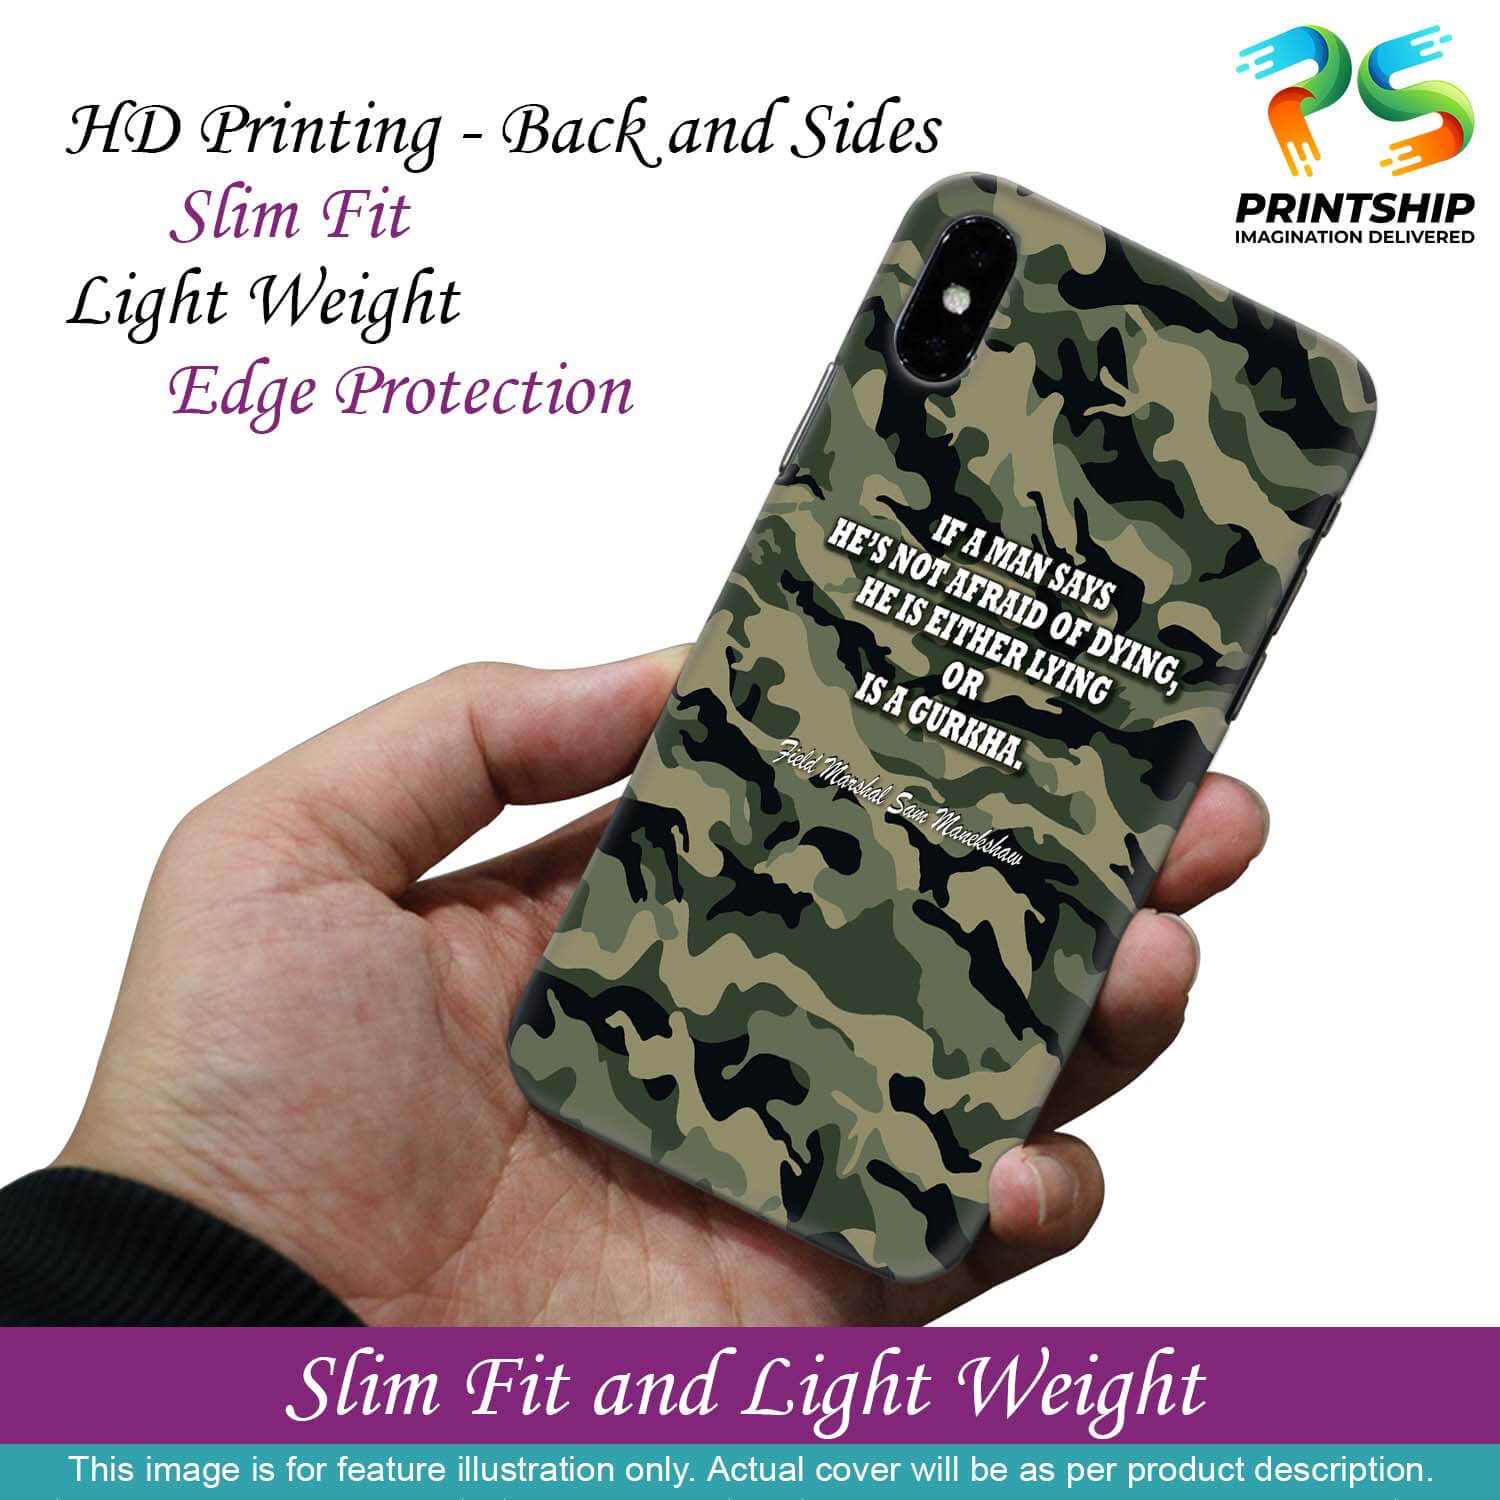 W0450-Indian Army Quote Back Cover for Samsung Galaxy J6 (2018)